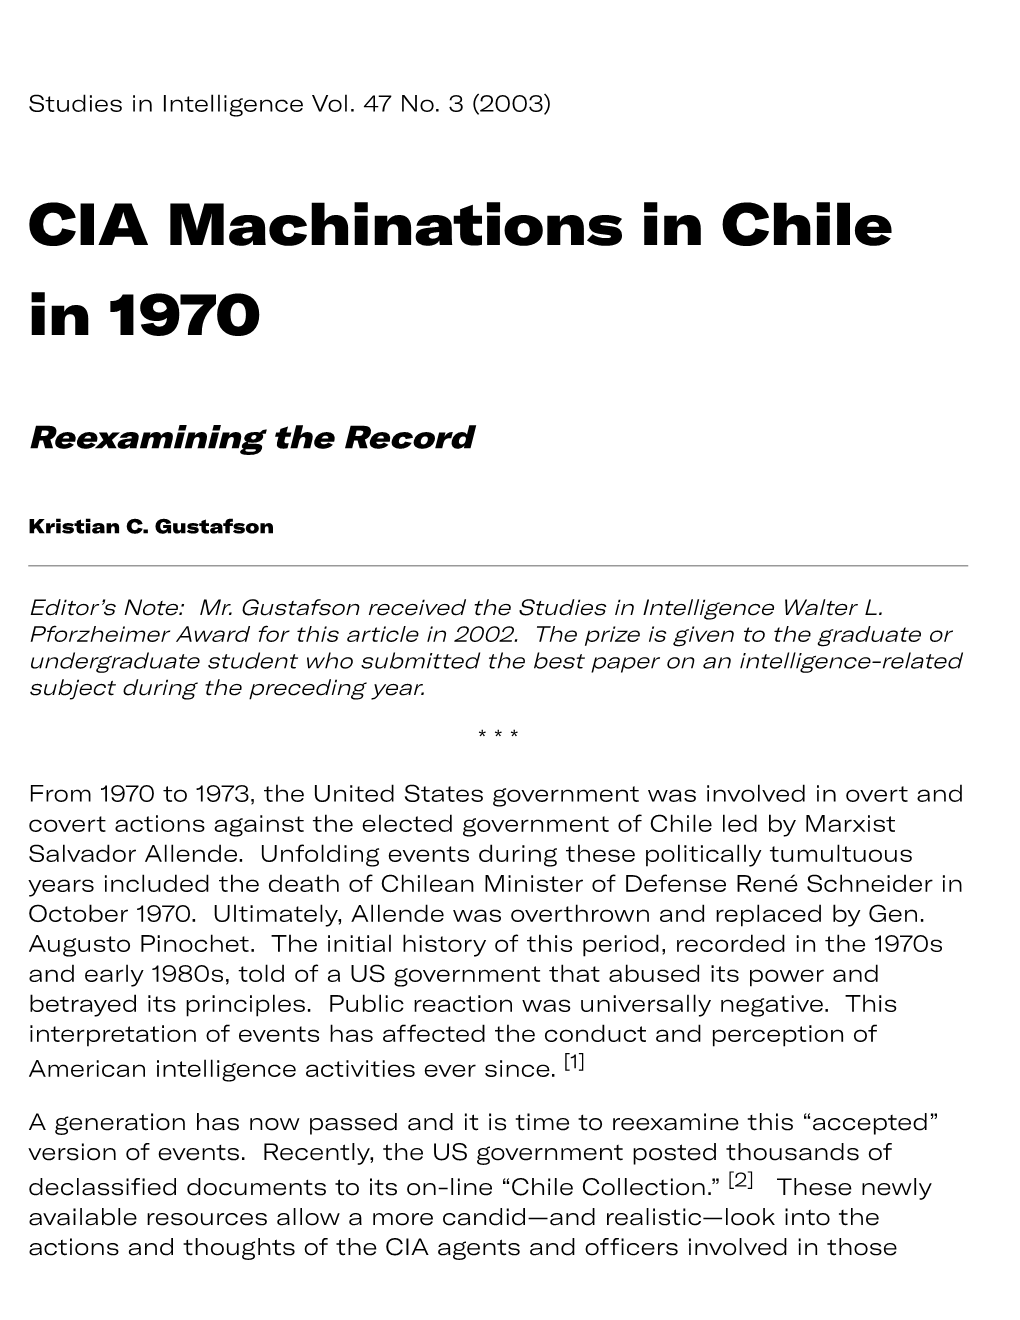 CIA Machinations in Chile in 1970: Reexamining the Record